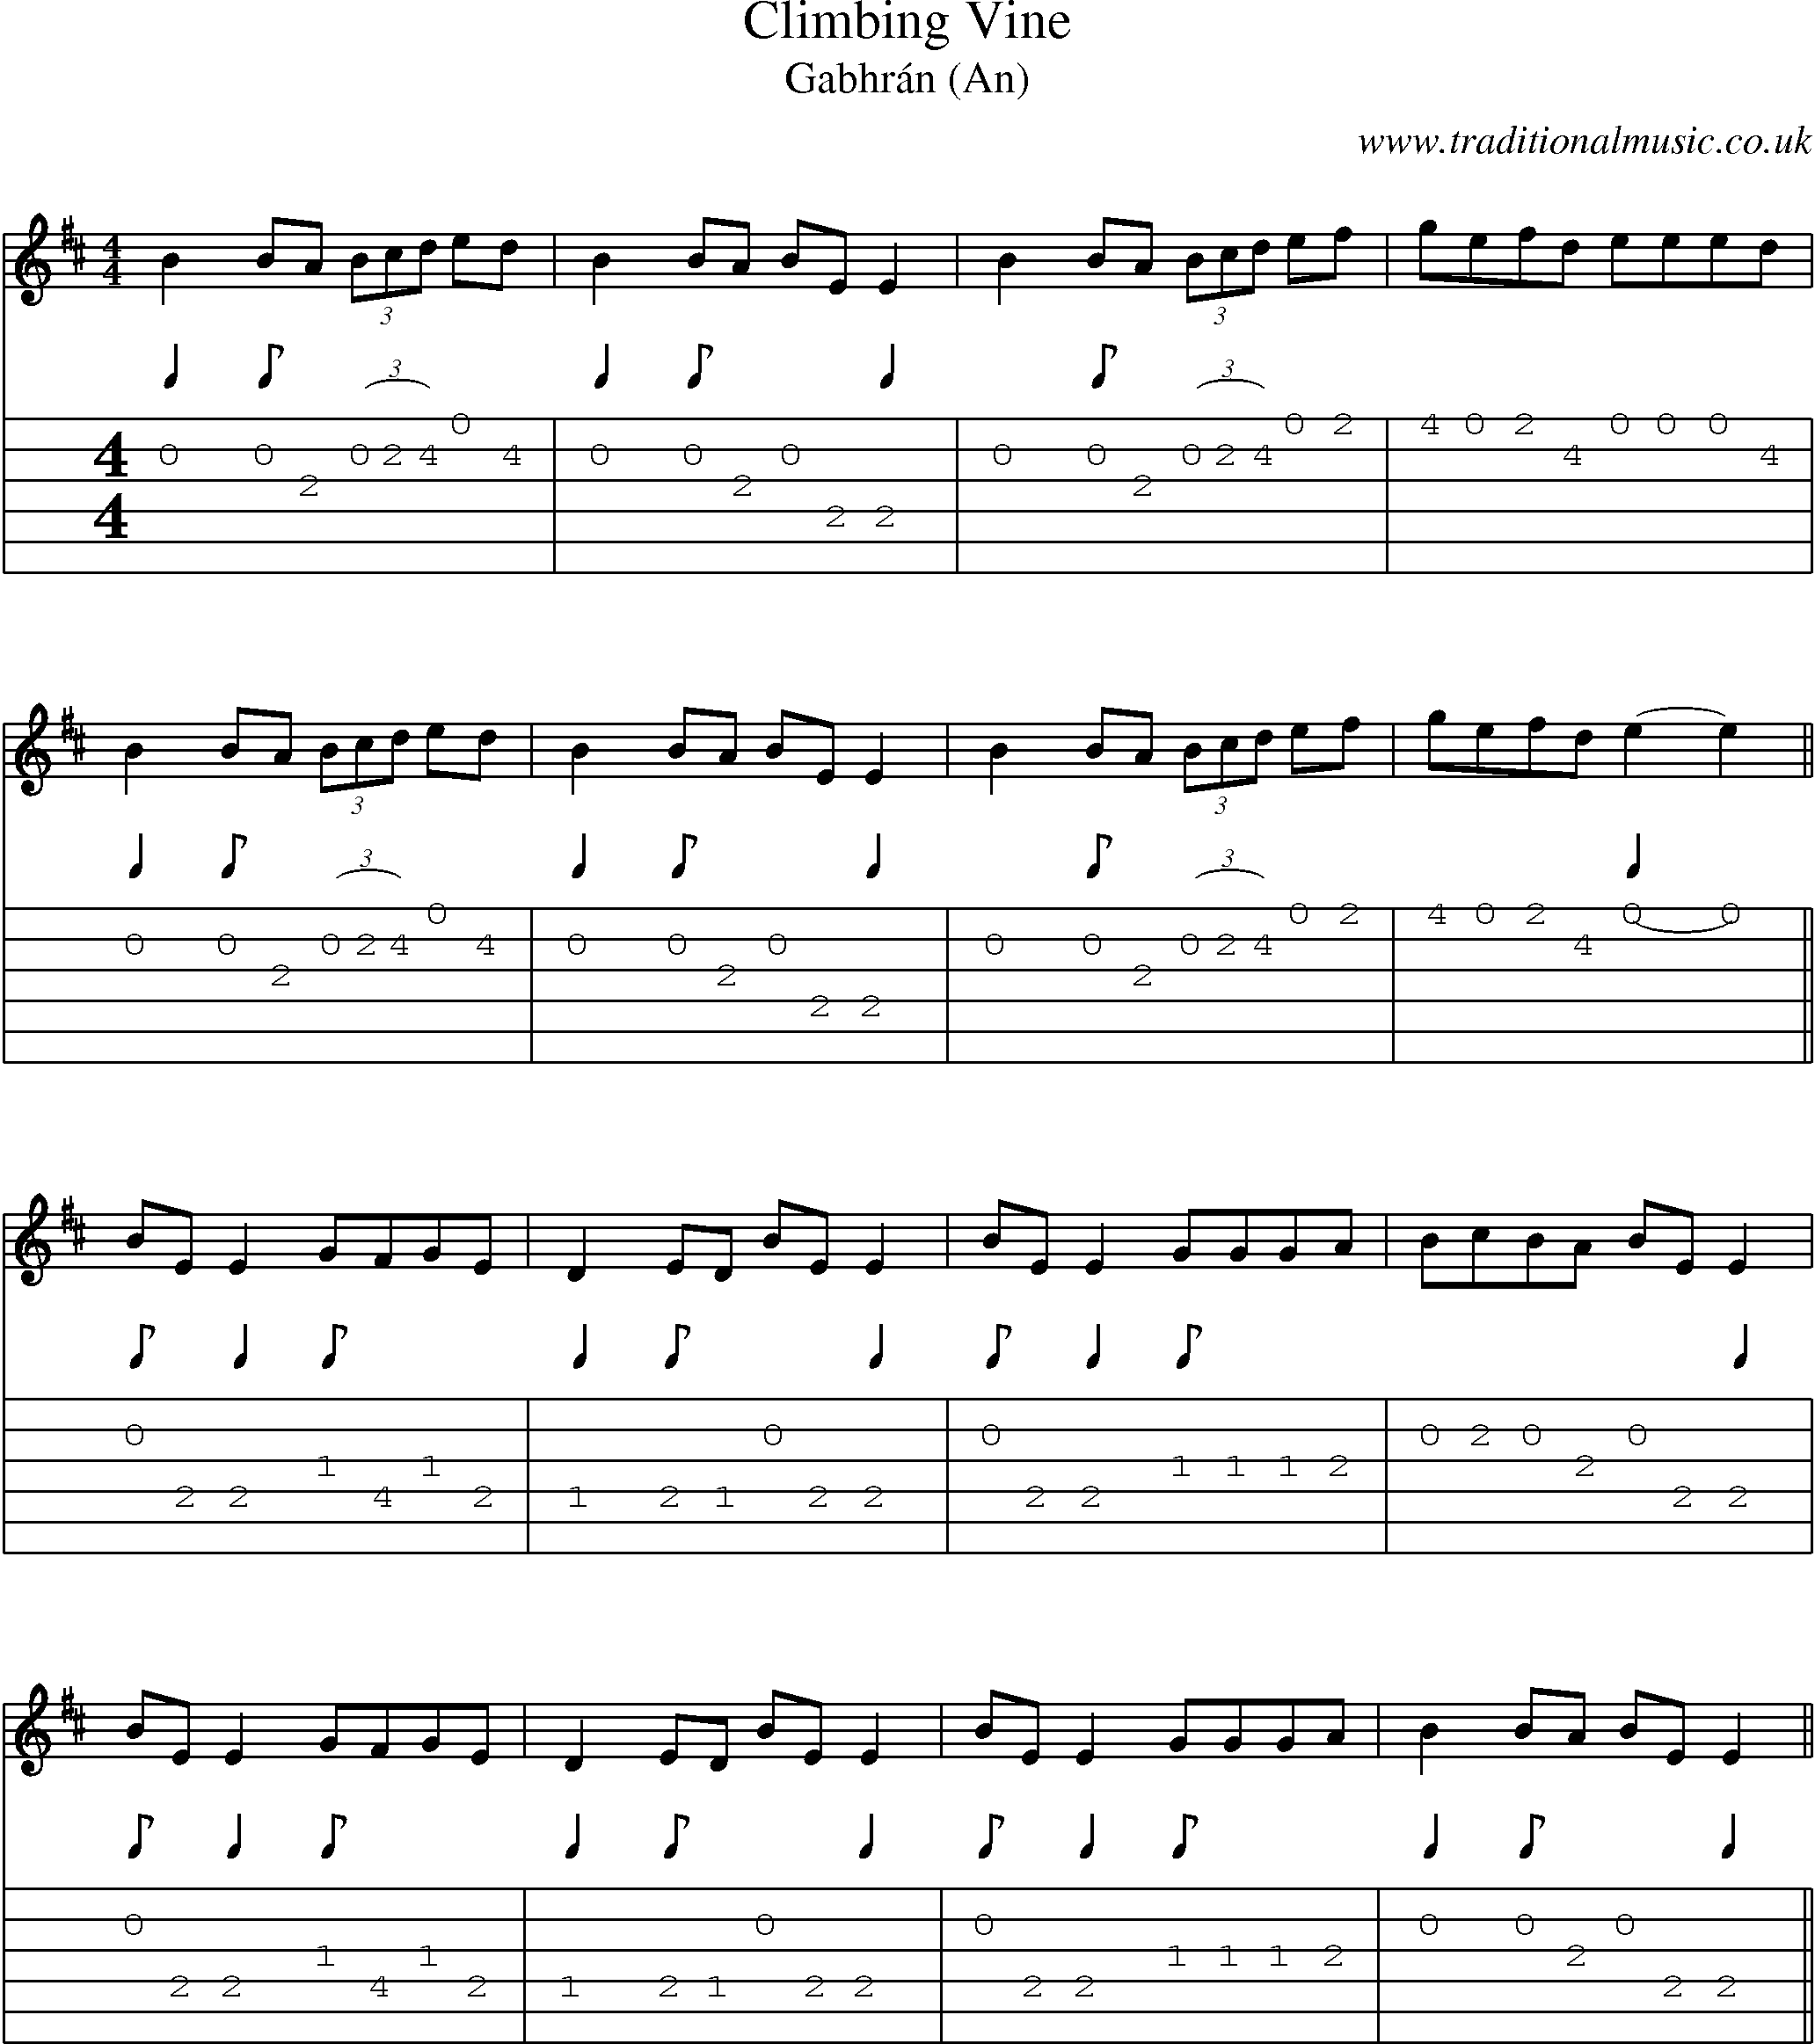 Music Score and Guitar Tabs for Climbing Vine